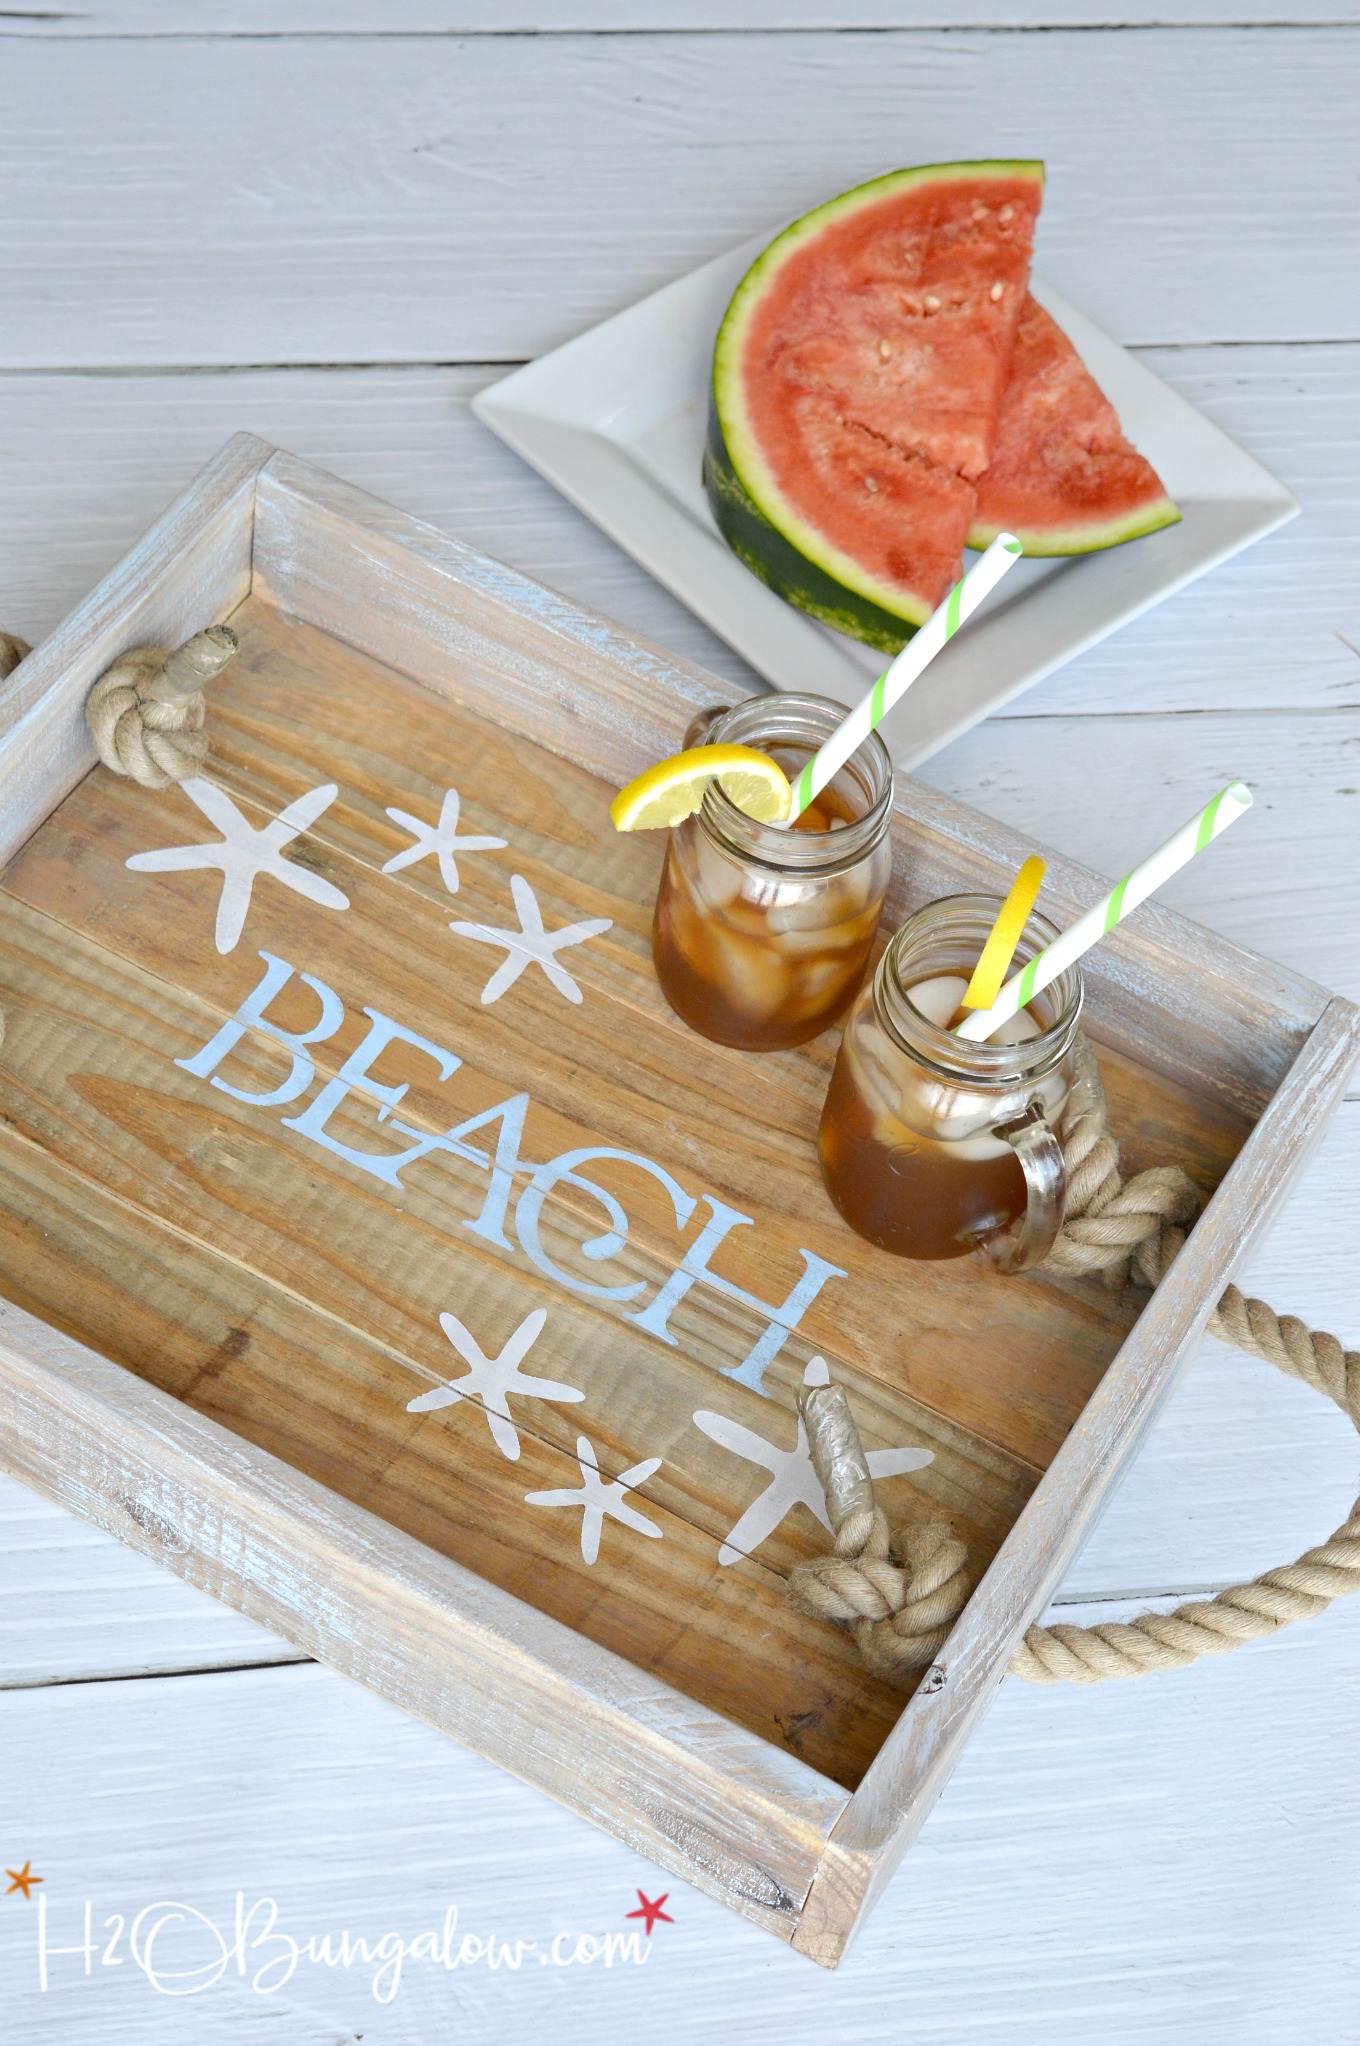 20 DIY Beach Inspired Home Decor Projects- Check out these DIY beach inspired home décor projects so you can add a coastal vibe to your home's summer decor on a budget! | Coastal DIY home decor ideas, DIY projects, nautical home decor, beach cottage, easy crafts, #diyProjects #coastalDecor #homeDecor #crafts #ACultivatedNest